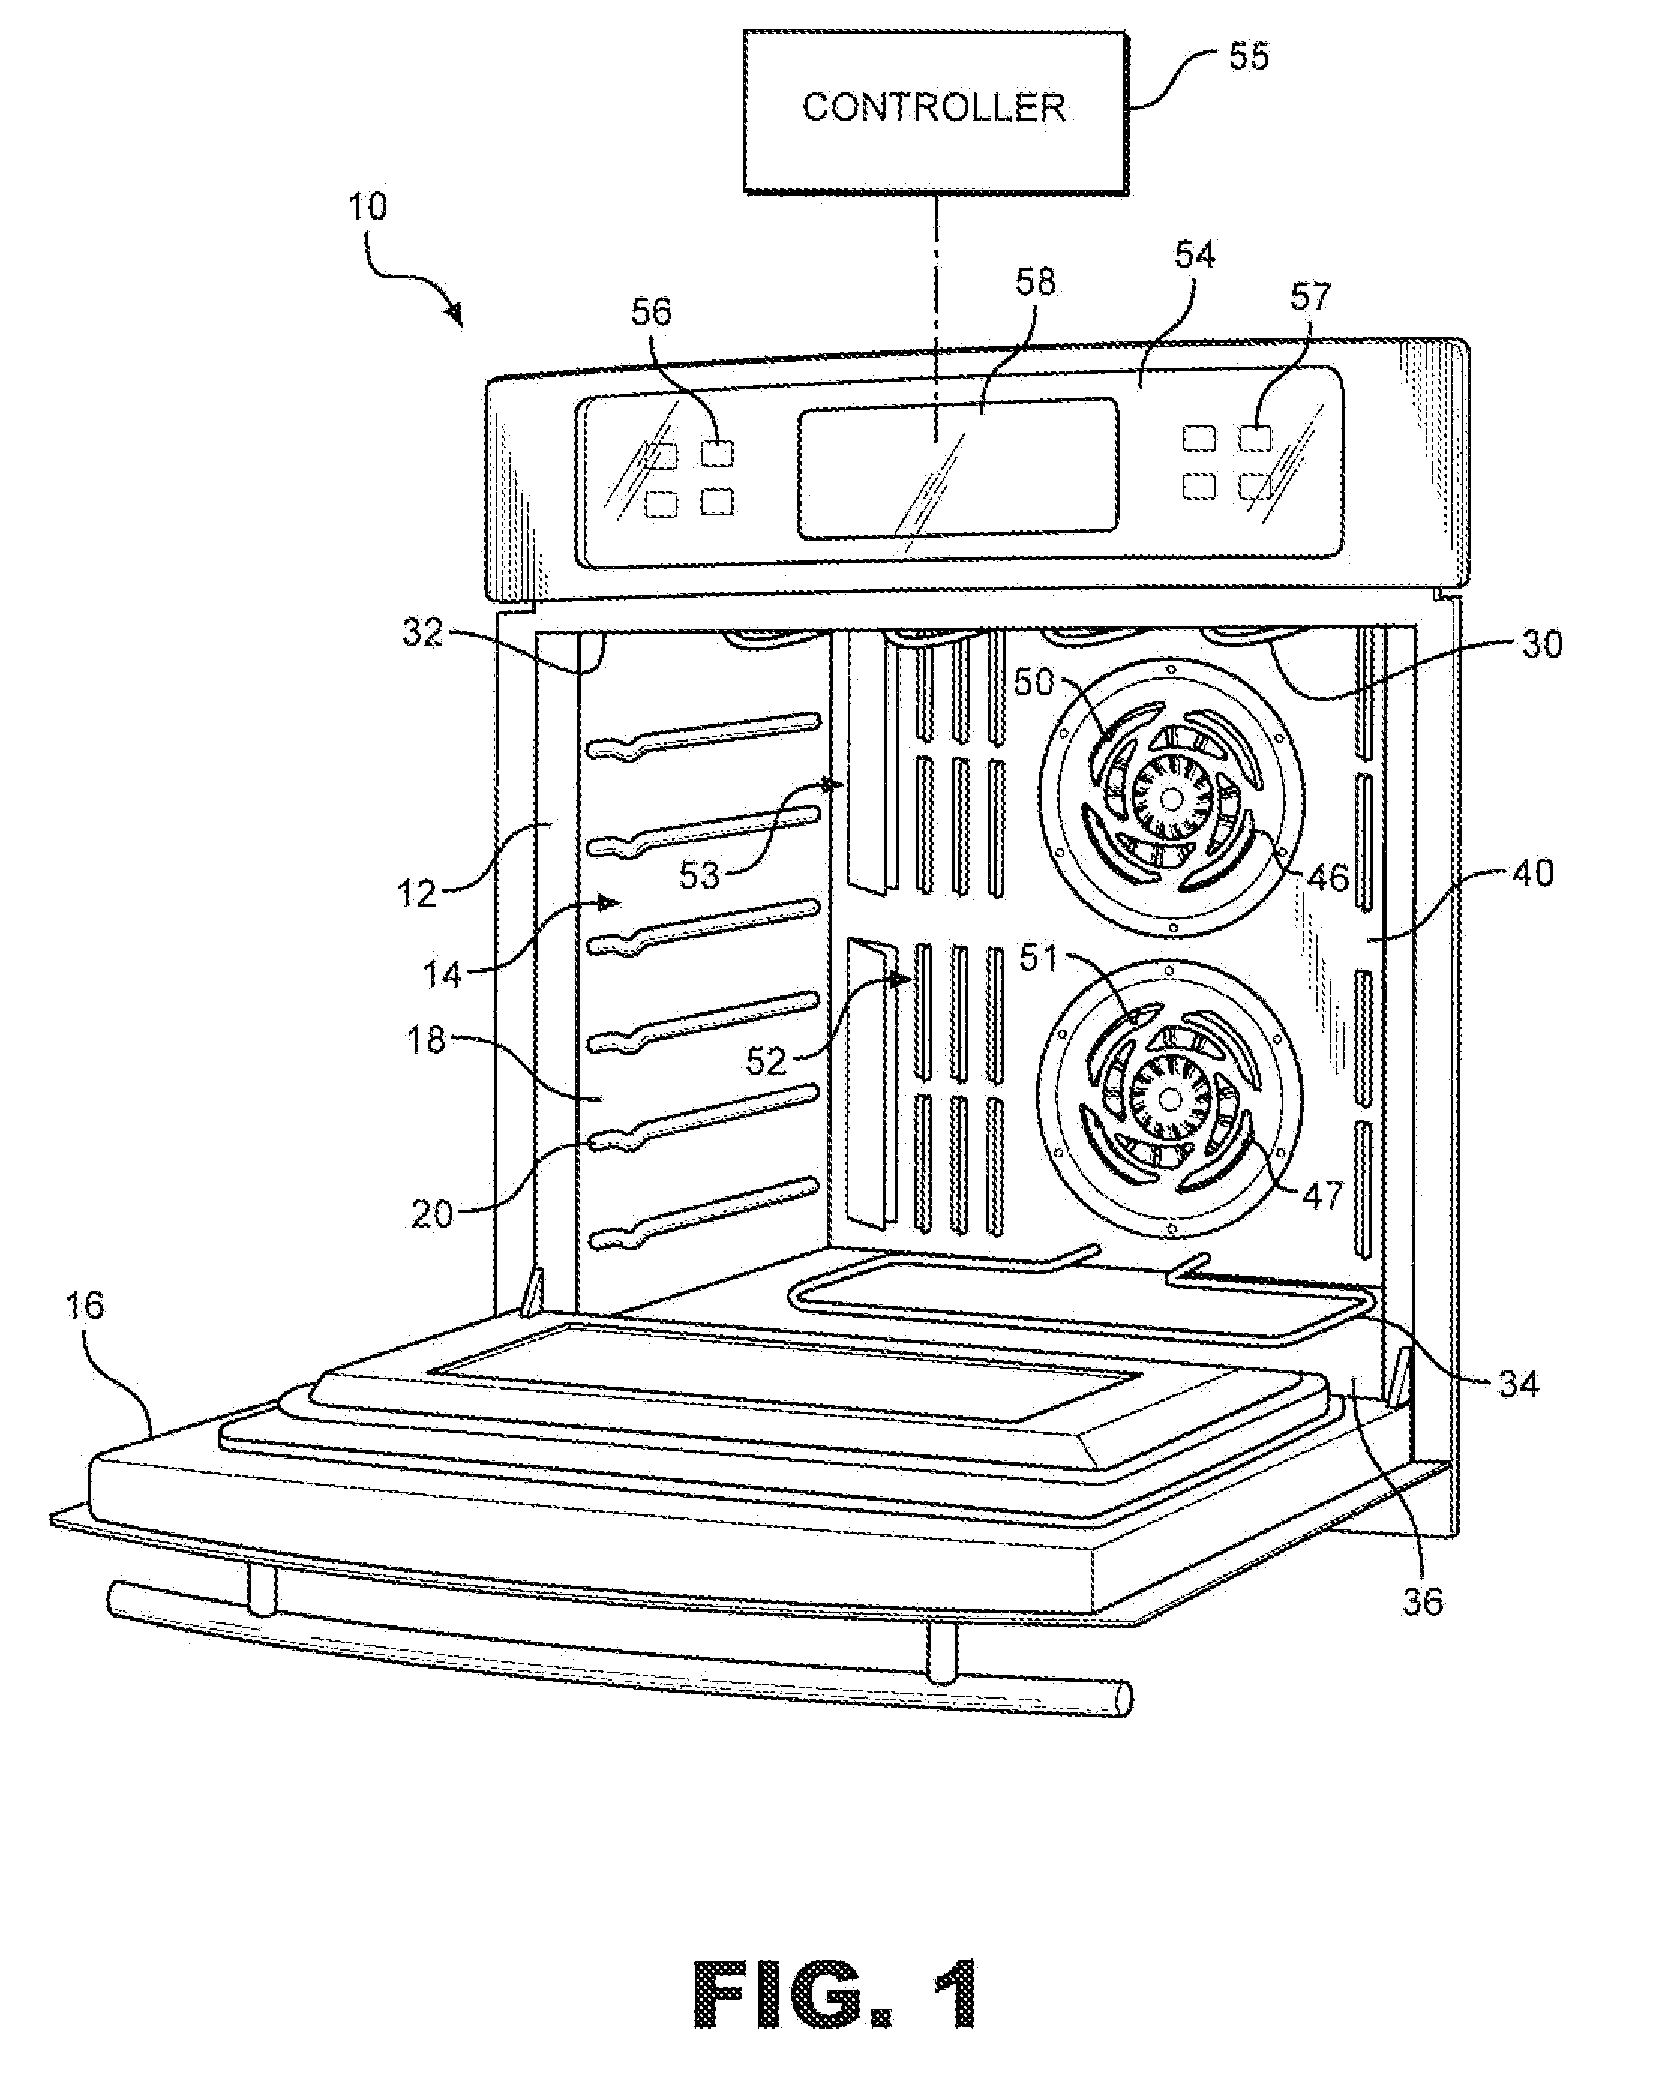 Sliding control system for a cooking appliance